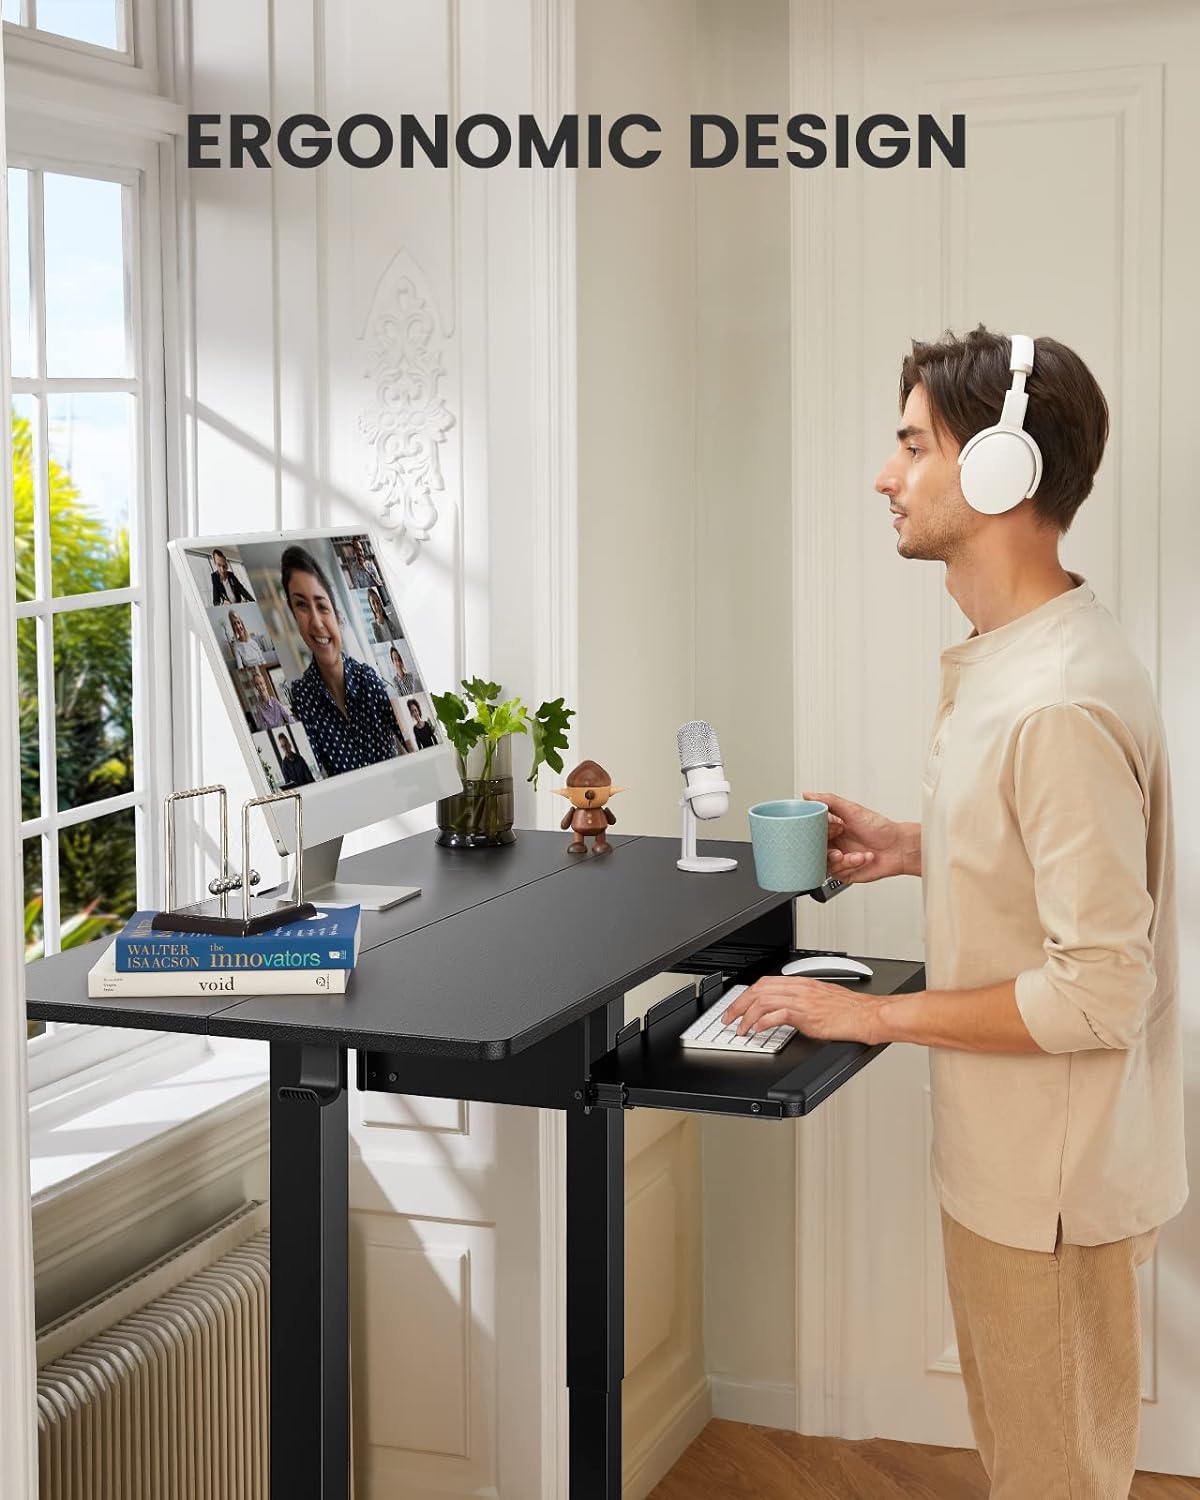 ErGear Electric Standing Desk with Keyboard Tray, 55x28 Inches Adjustable Height - $140